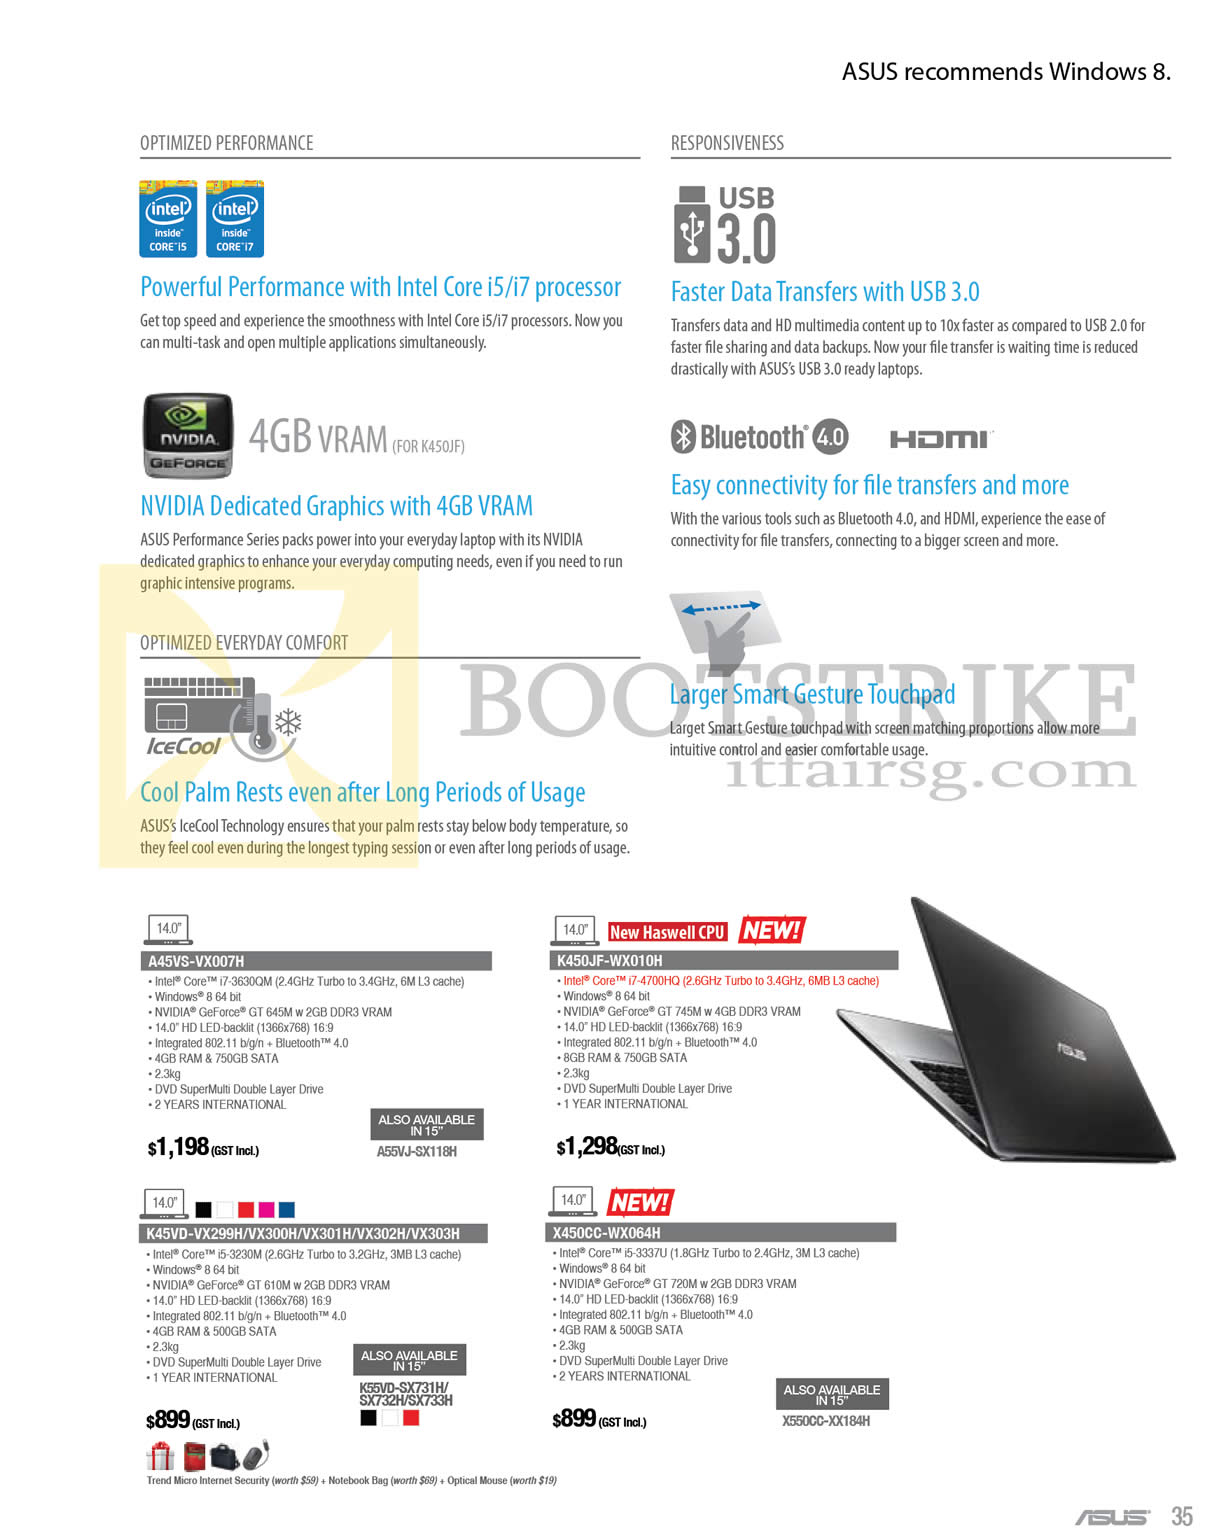 PC SHOW 2013 price list image brochure of ASUS Notebooks K, A, X Series A45VS-VX007H, K450JF-WX010H, K45VD-VX299H VX300H VX301H VX302H VX303H, X450CC-WX064H, Features